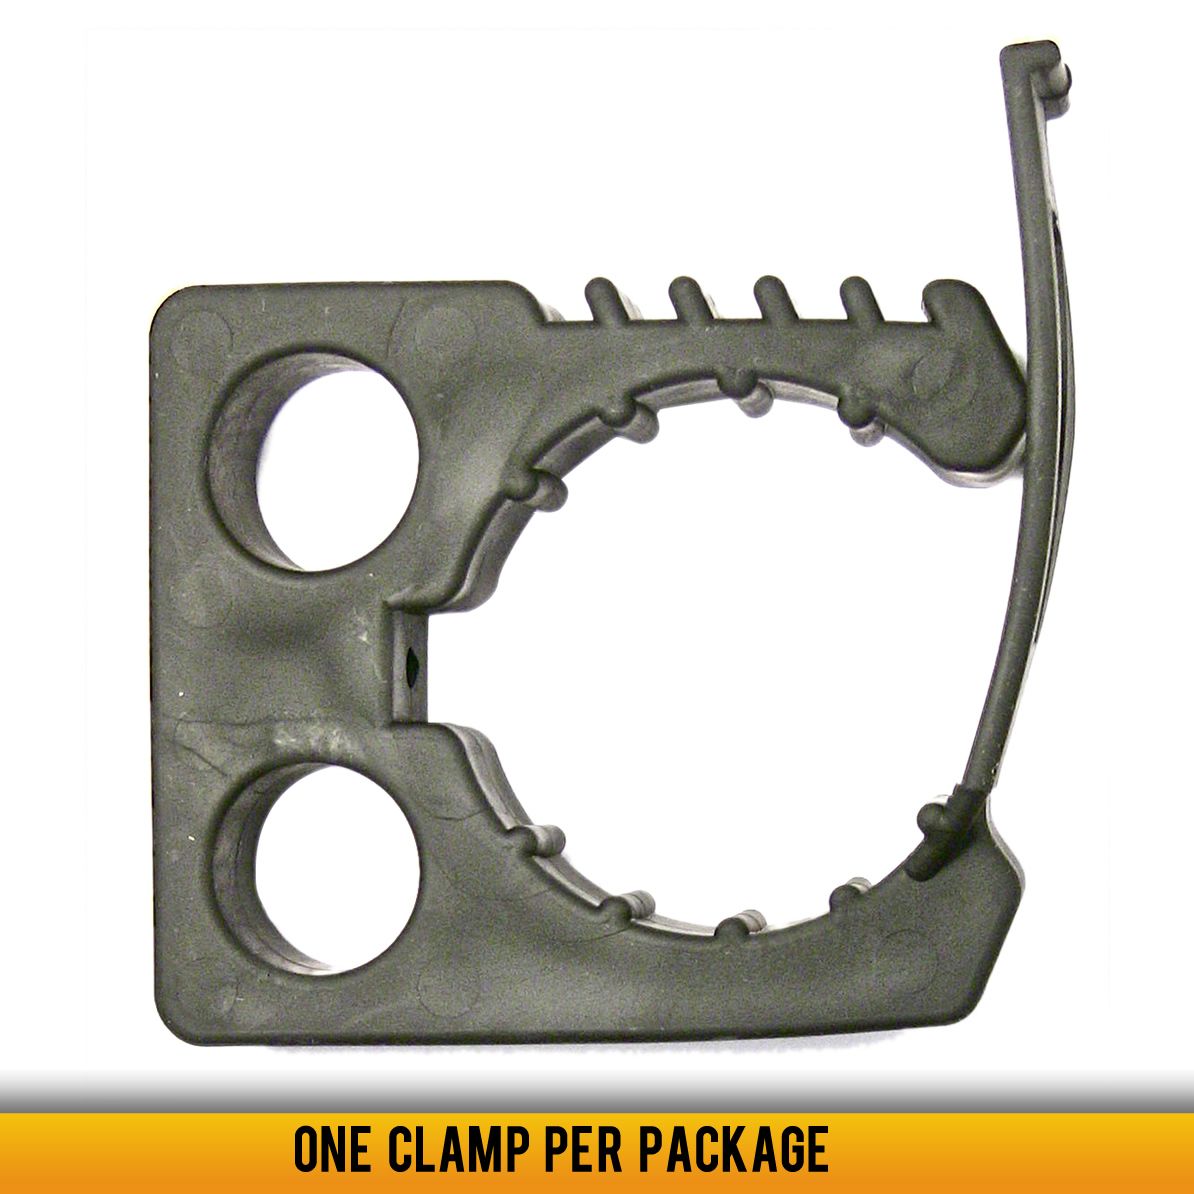 3" Quick Fist Clamp Quick Fist Clamps display